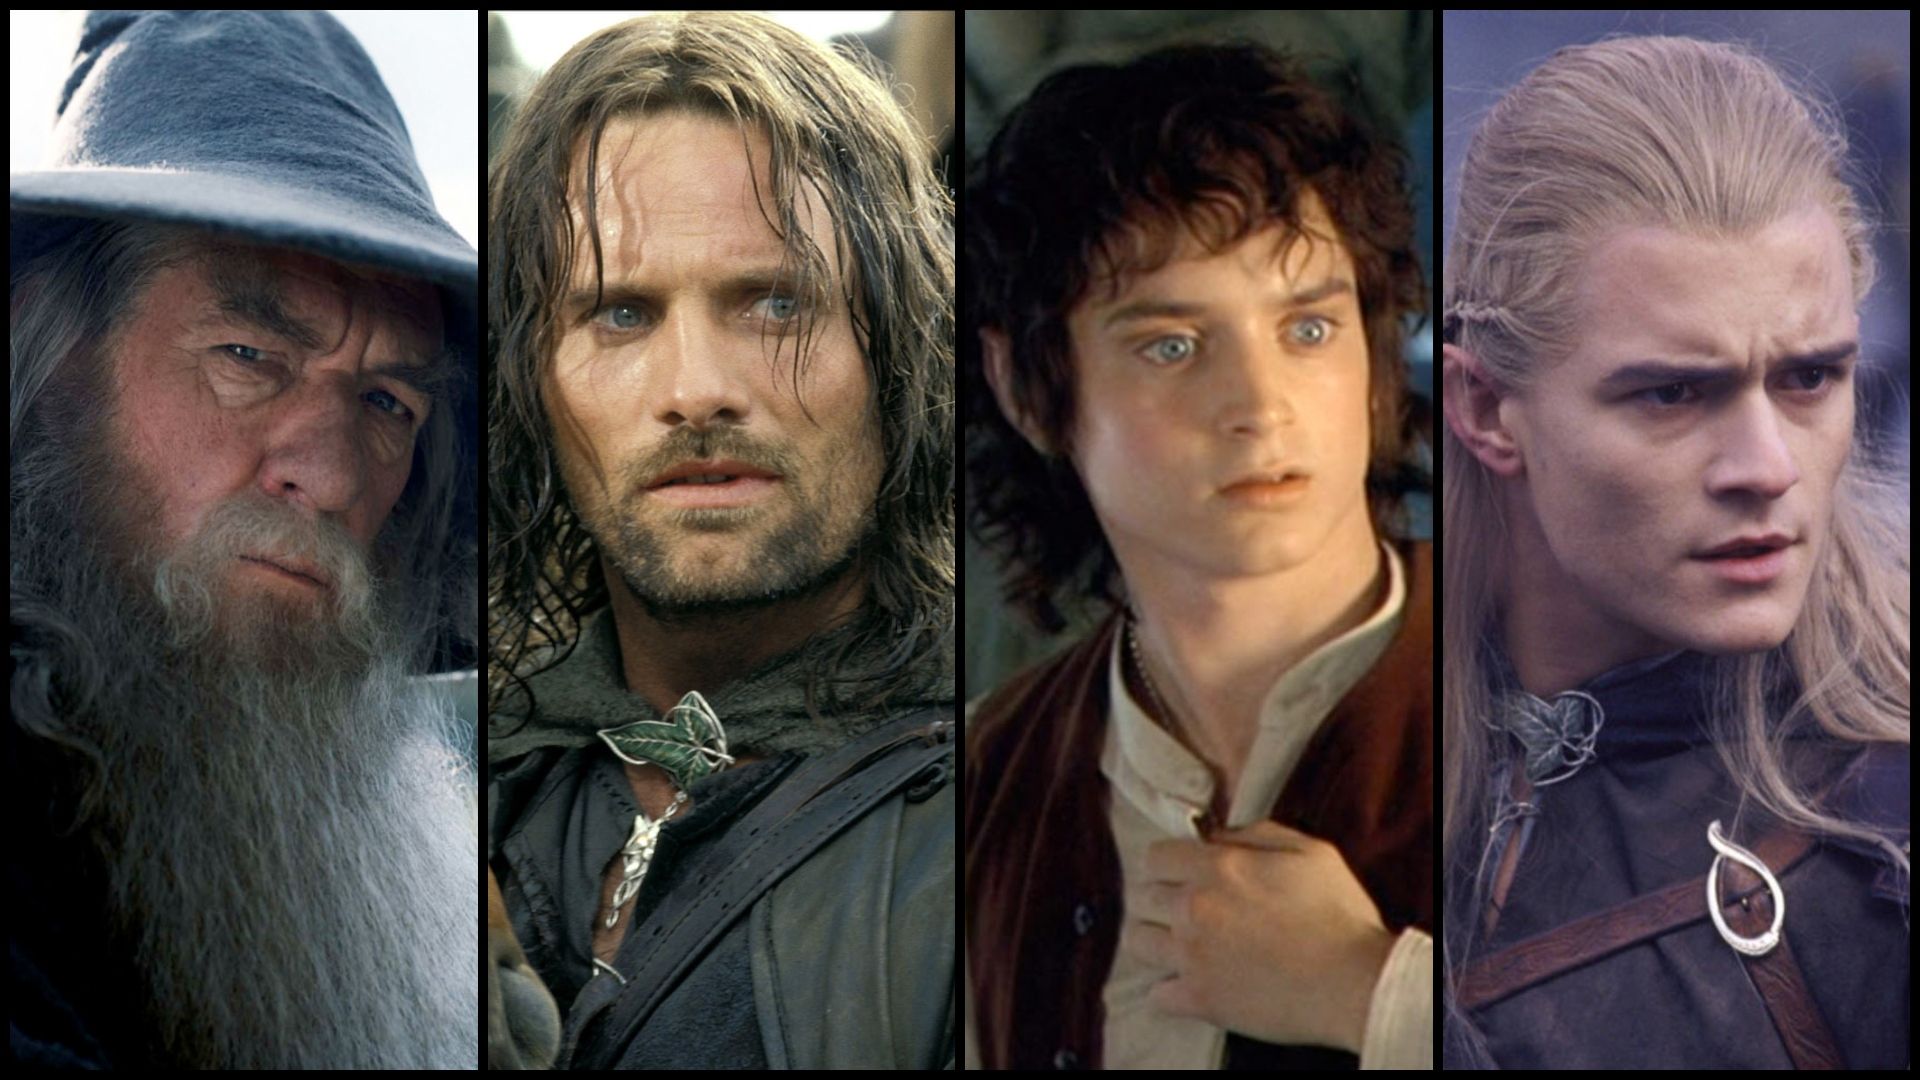 The lord of the rings characters | Lord of the rings, Lord, Character-gemektower.com.vn